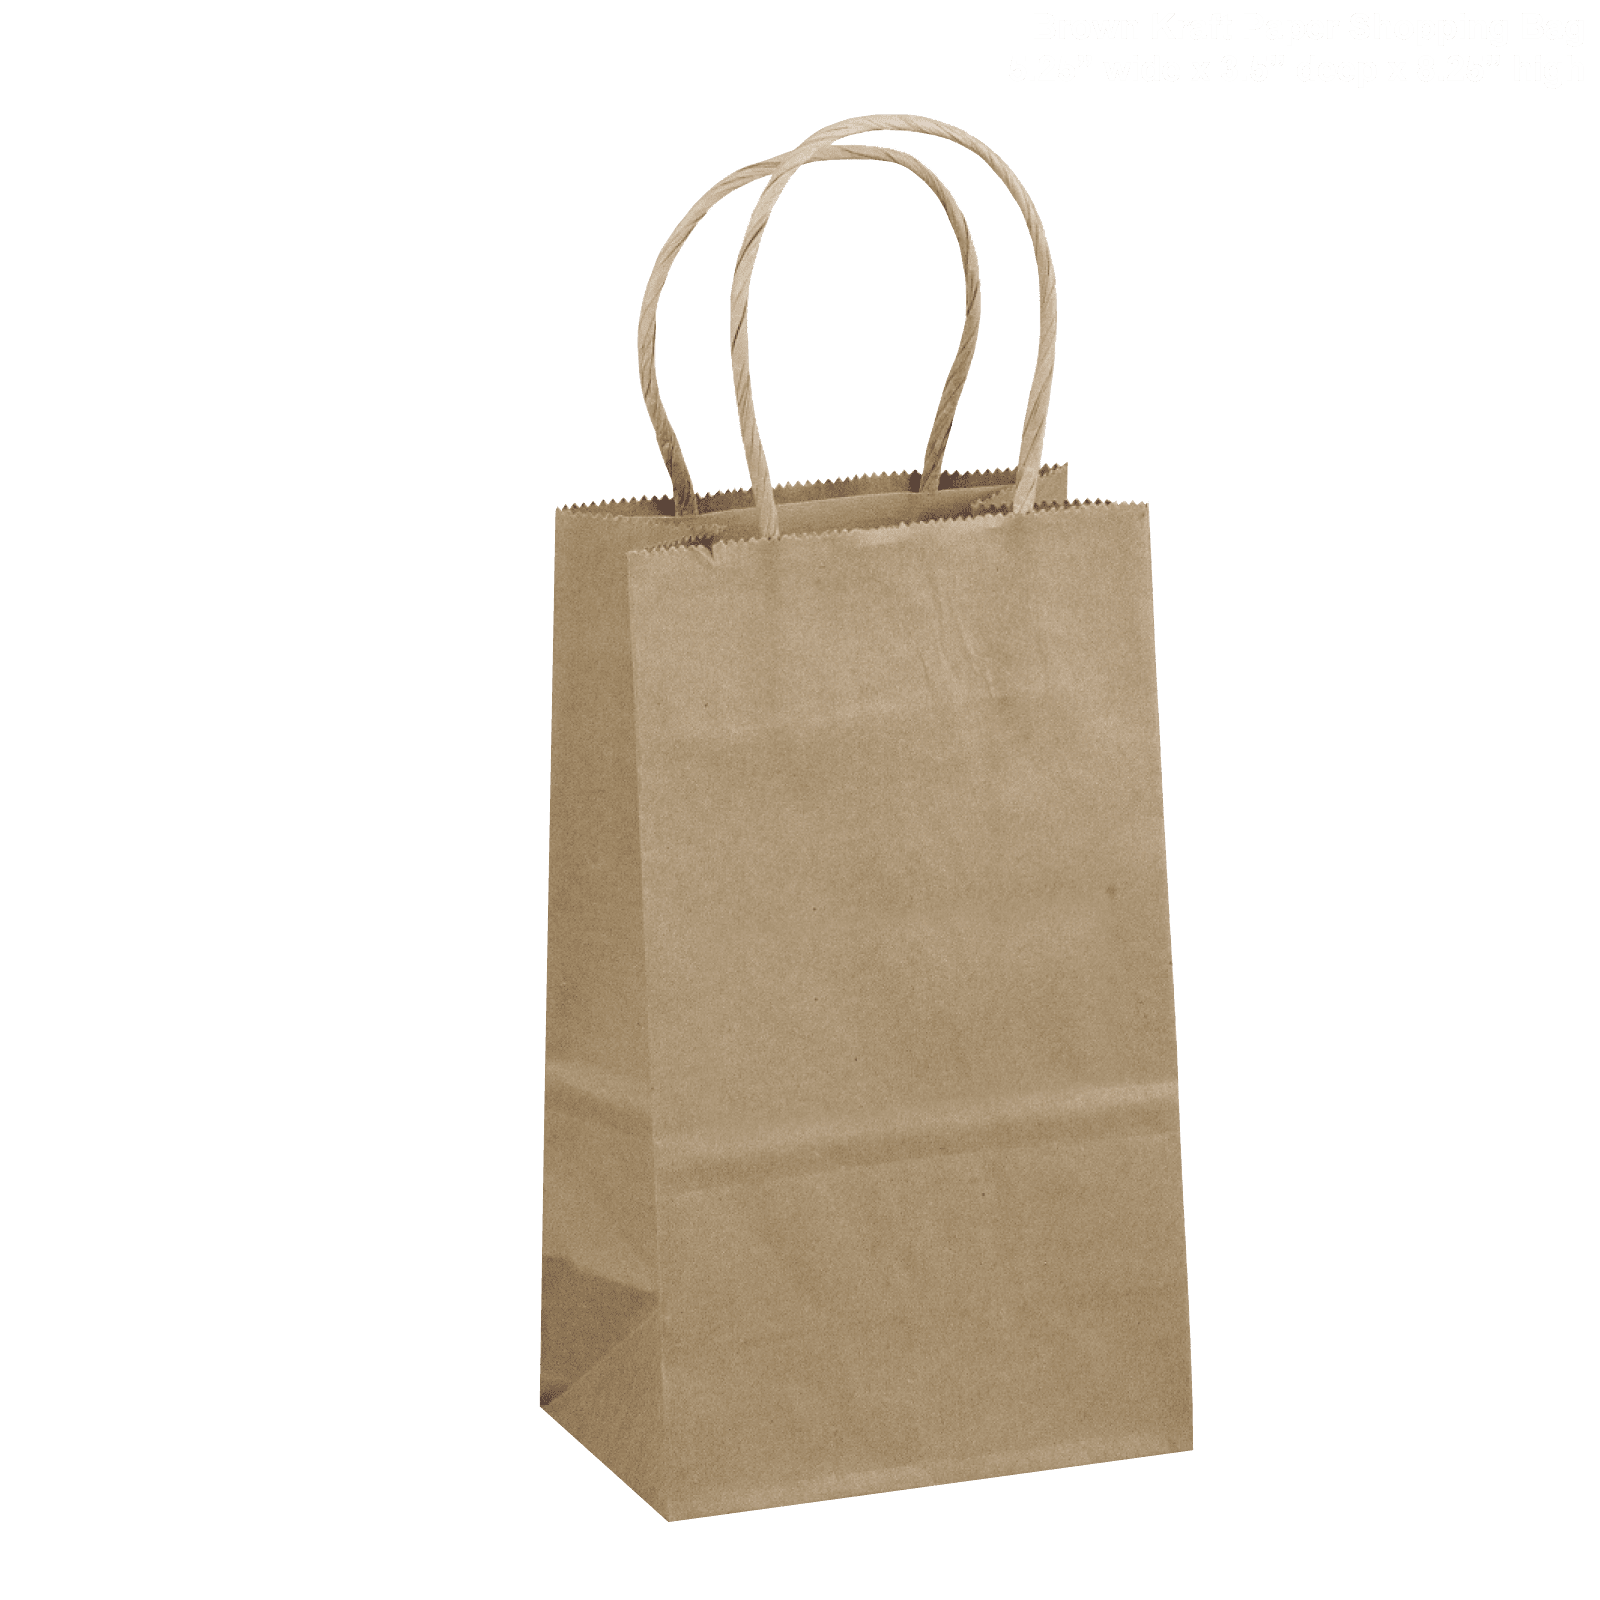 Strong Brown Twisted Handle Paper BagsKraft/Carrier/Twist/Gift/Fashion/Party! 